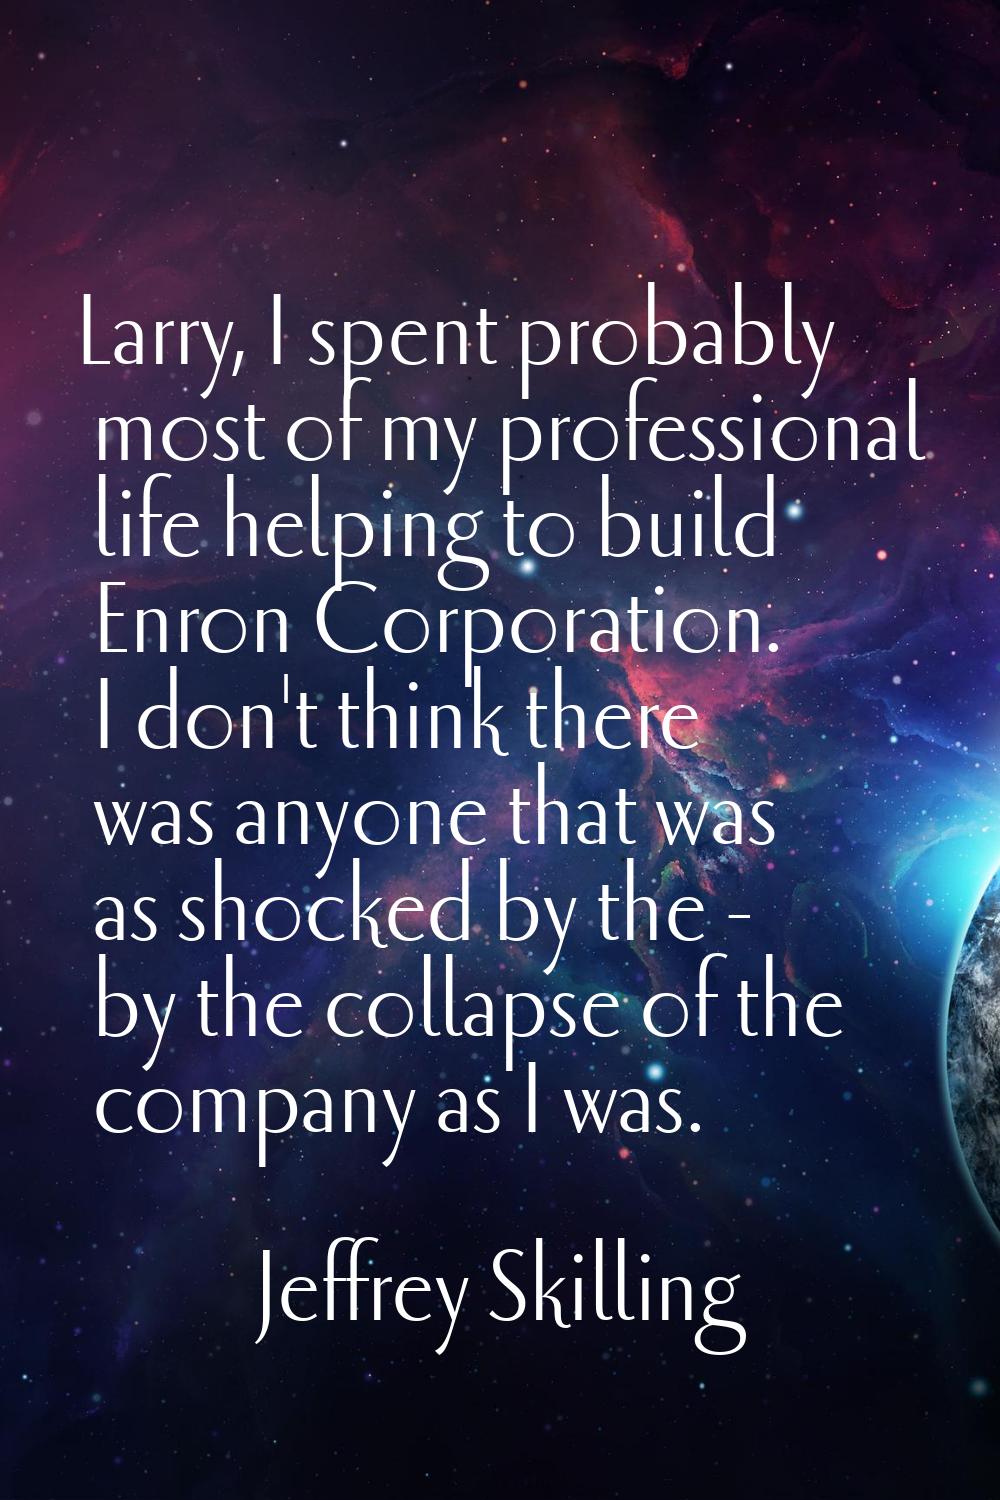 Larry, I spent probably most of my professional life helping to build Enron Corporation. I don't th